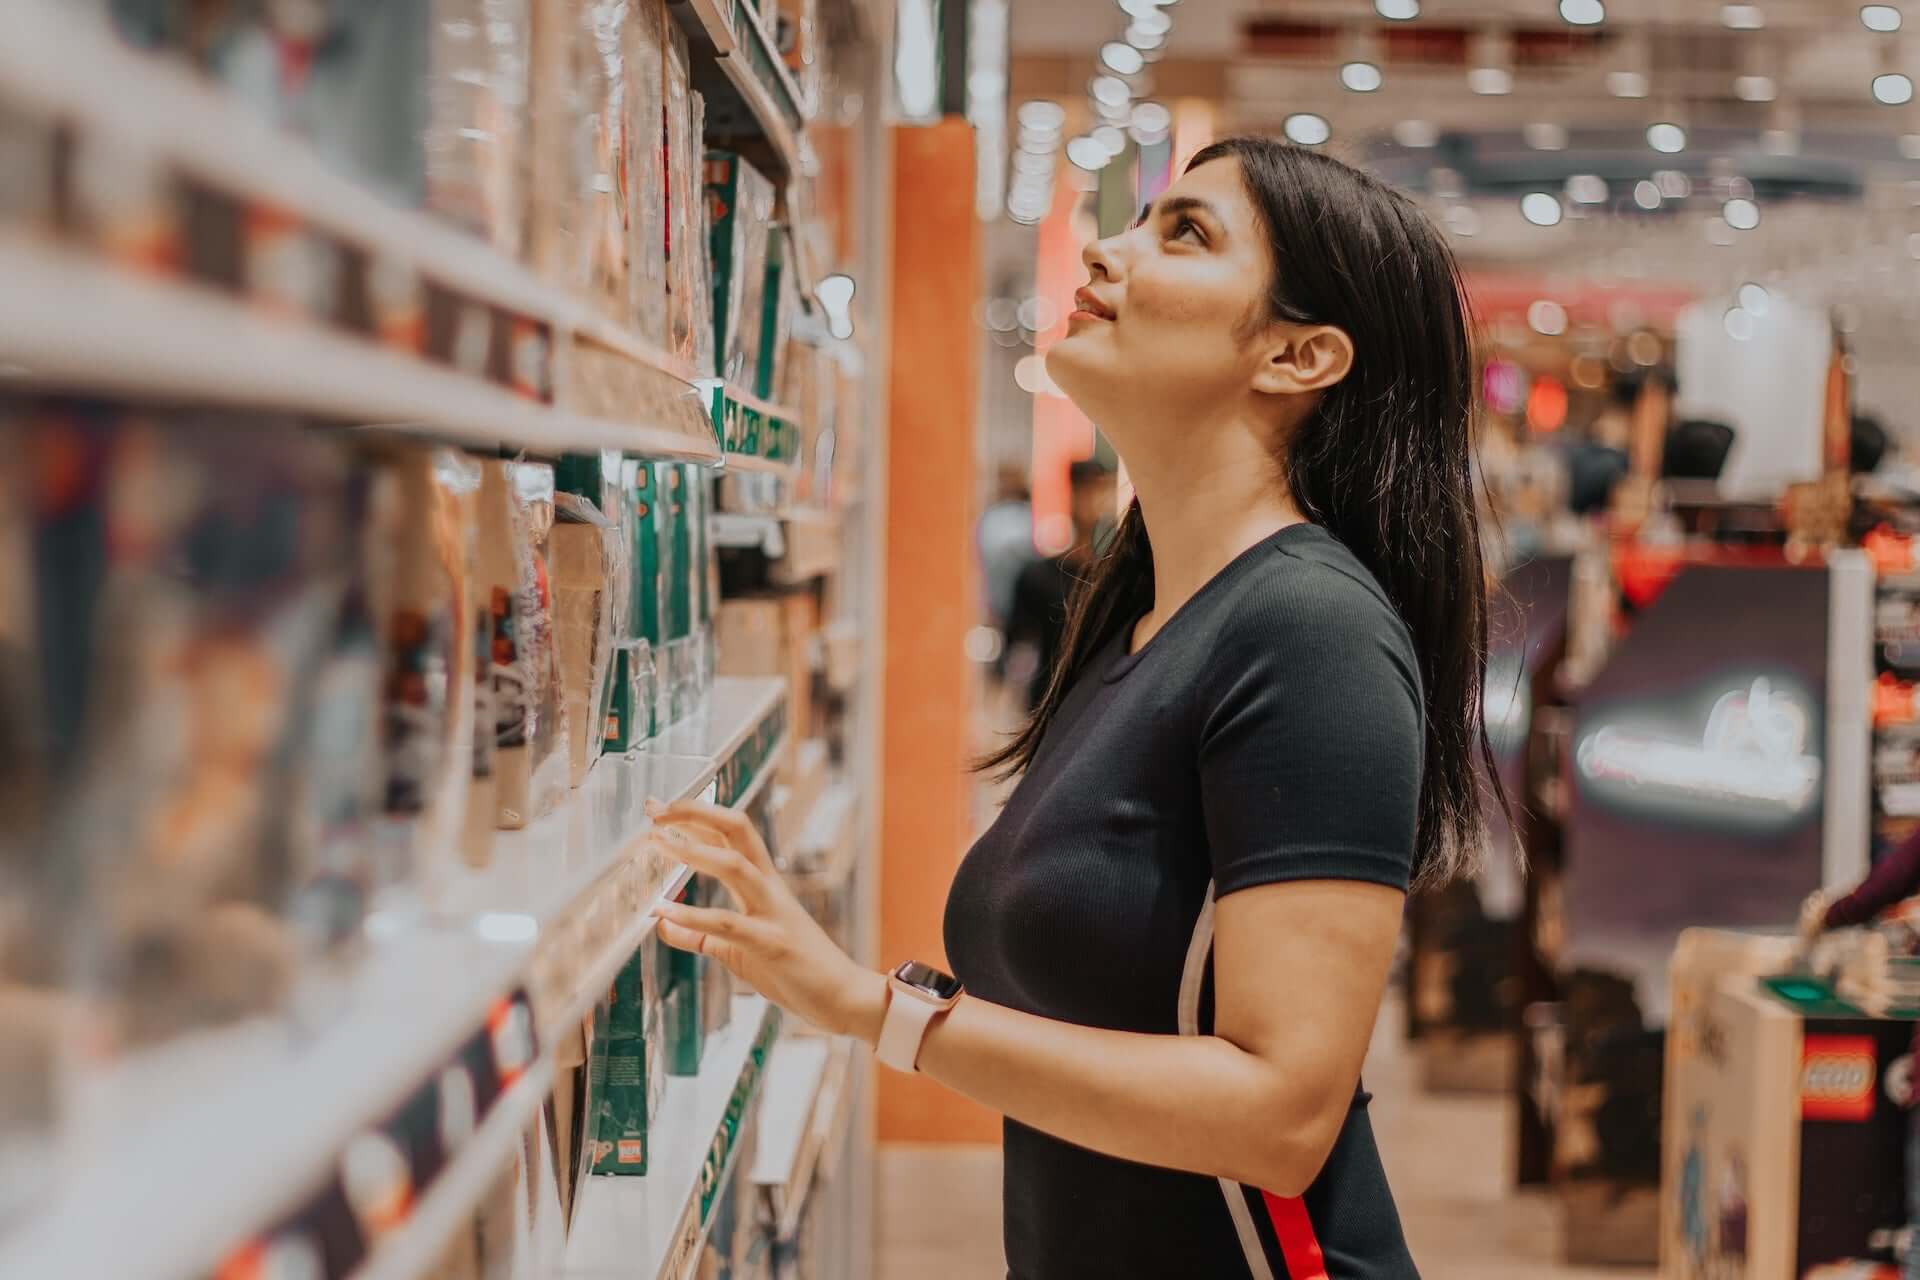 A woman stands in the personal care aisle of a grocery store, looking at body washes.